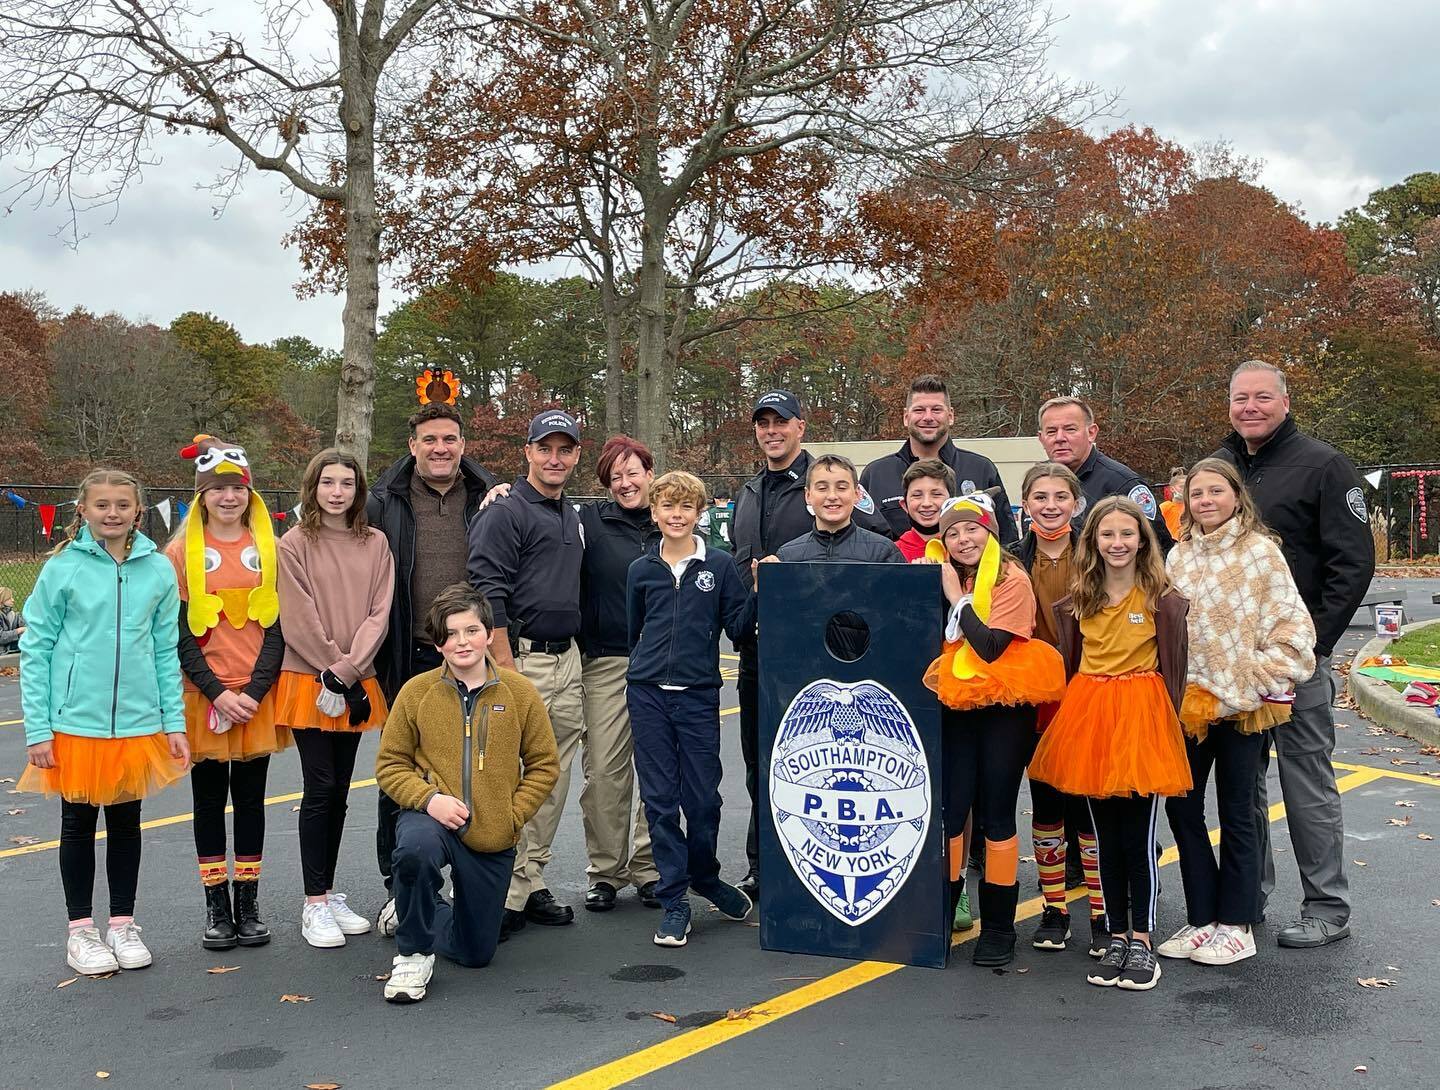 Sixth-grade students from Raynor Country Day School went head to head with the Southampton Town Police Department in a cornhole competition recently.